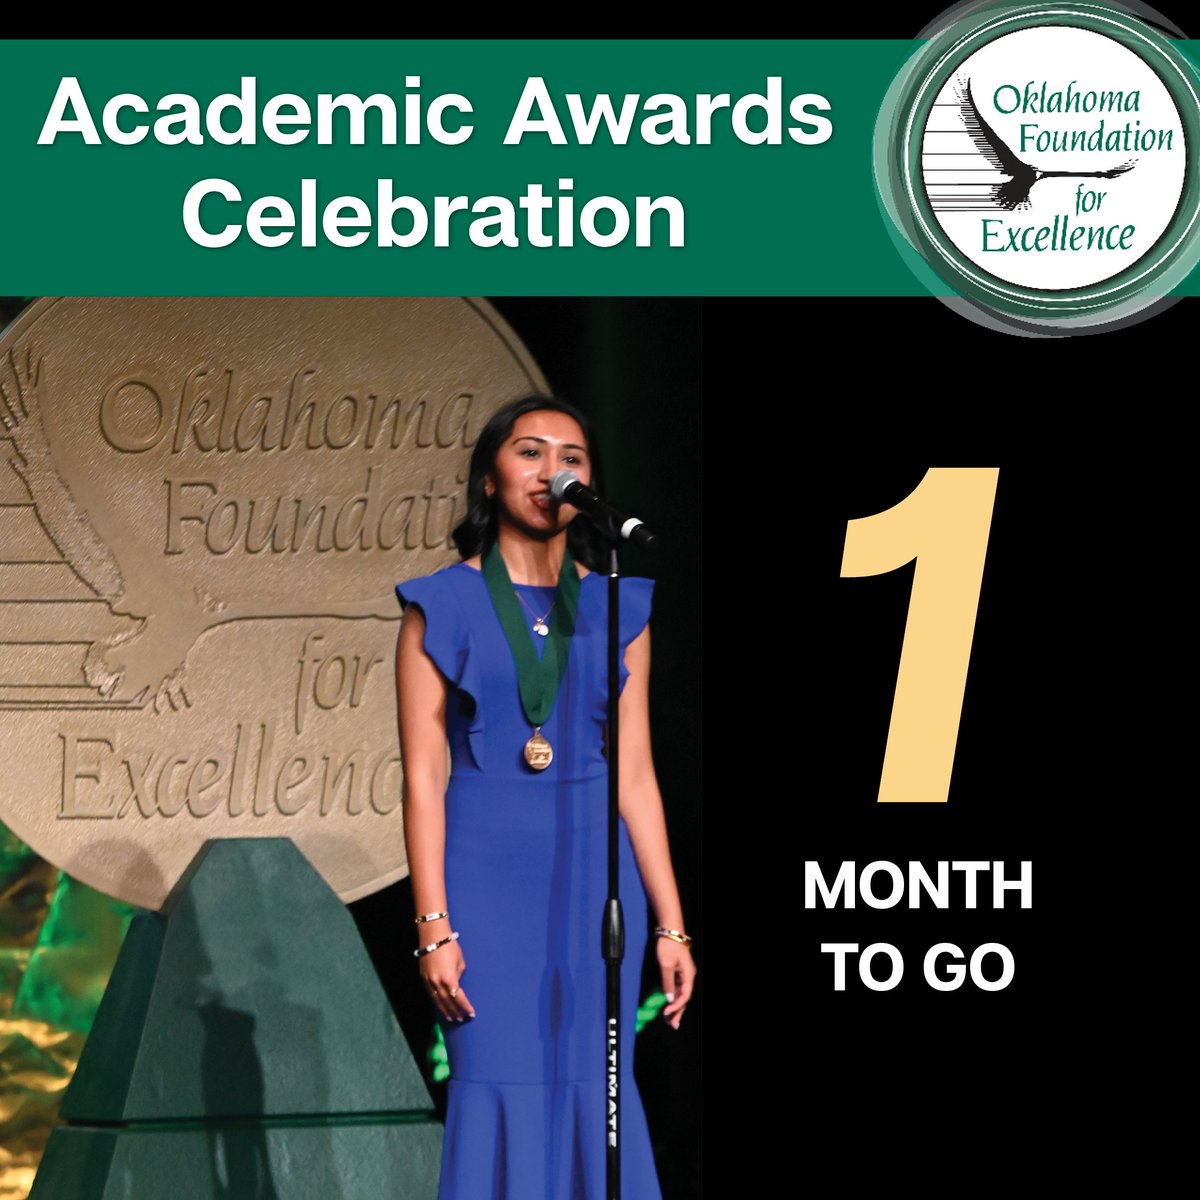 There’s only one month to go until OFE’s 38th annual Academic Awards Celebration. You don’t want to miss this incredible event, which takes place Saturday, May 4, in Norman. Learn more or register at ofe.org/academic-award… #oklaed #ofeawards